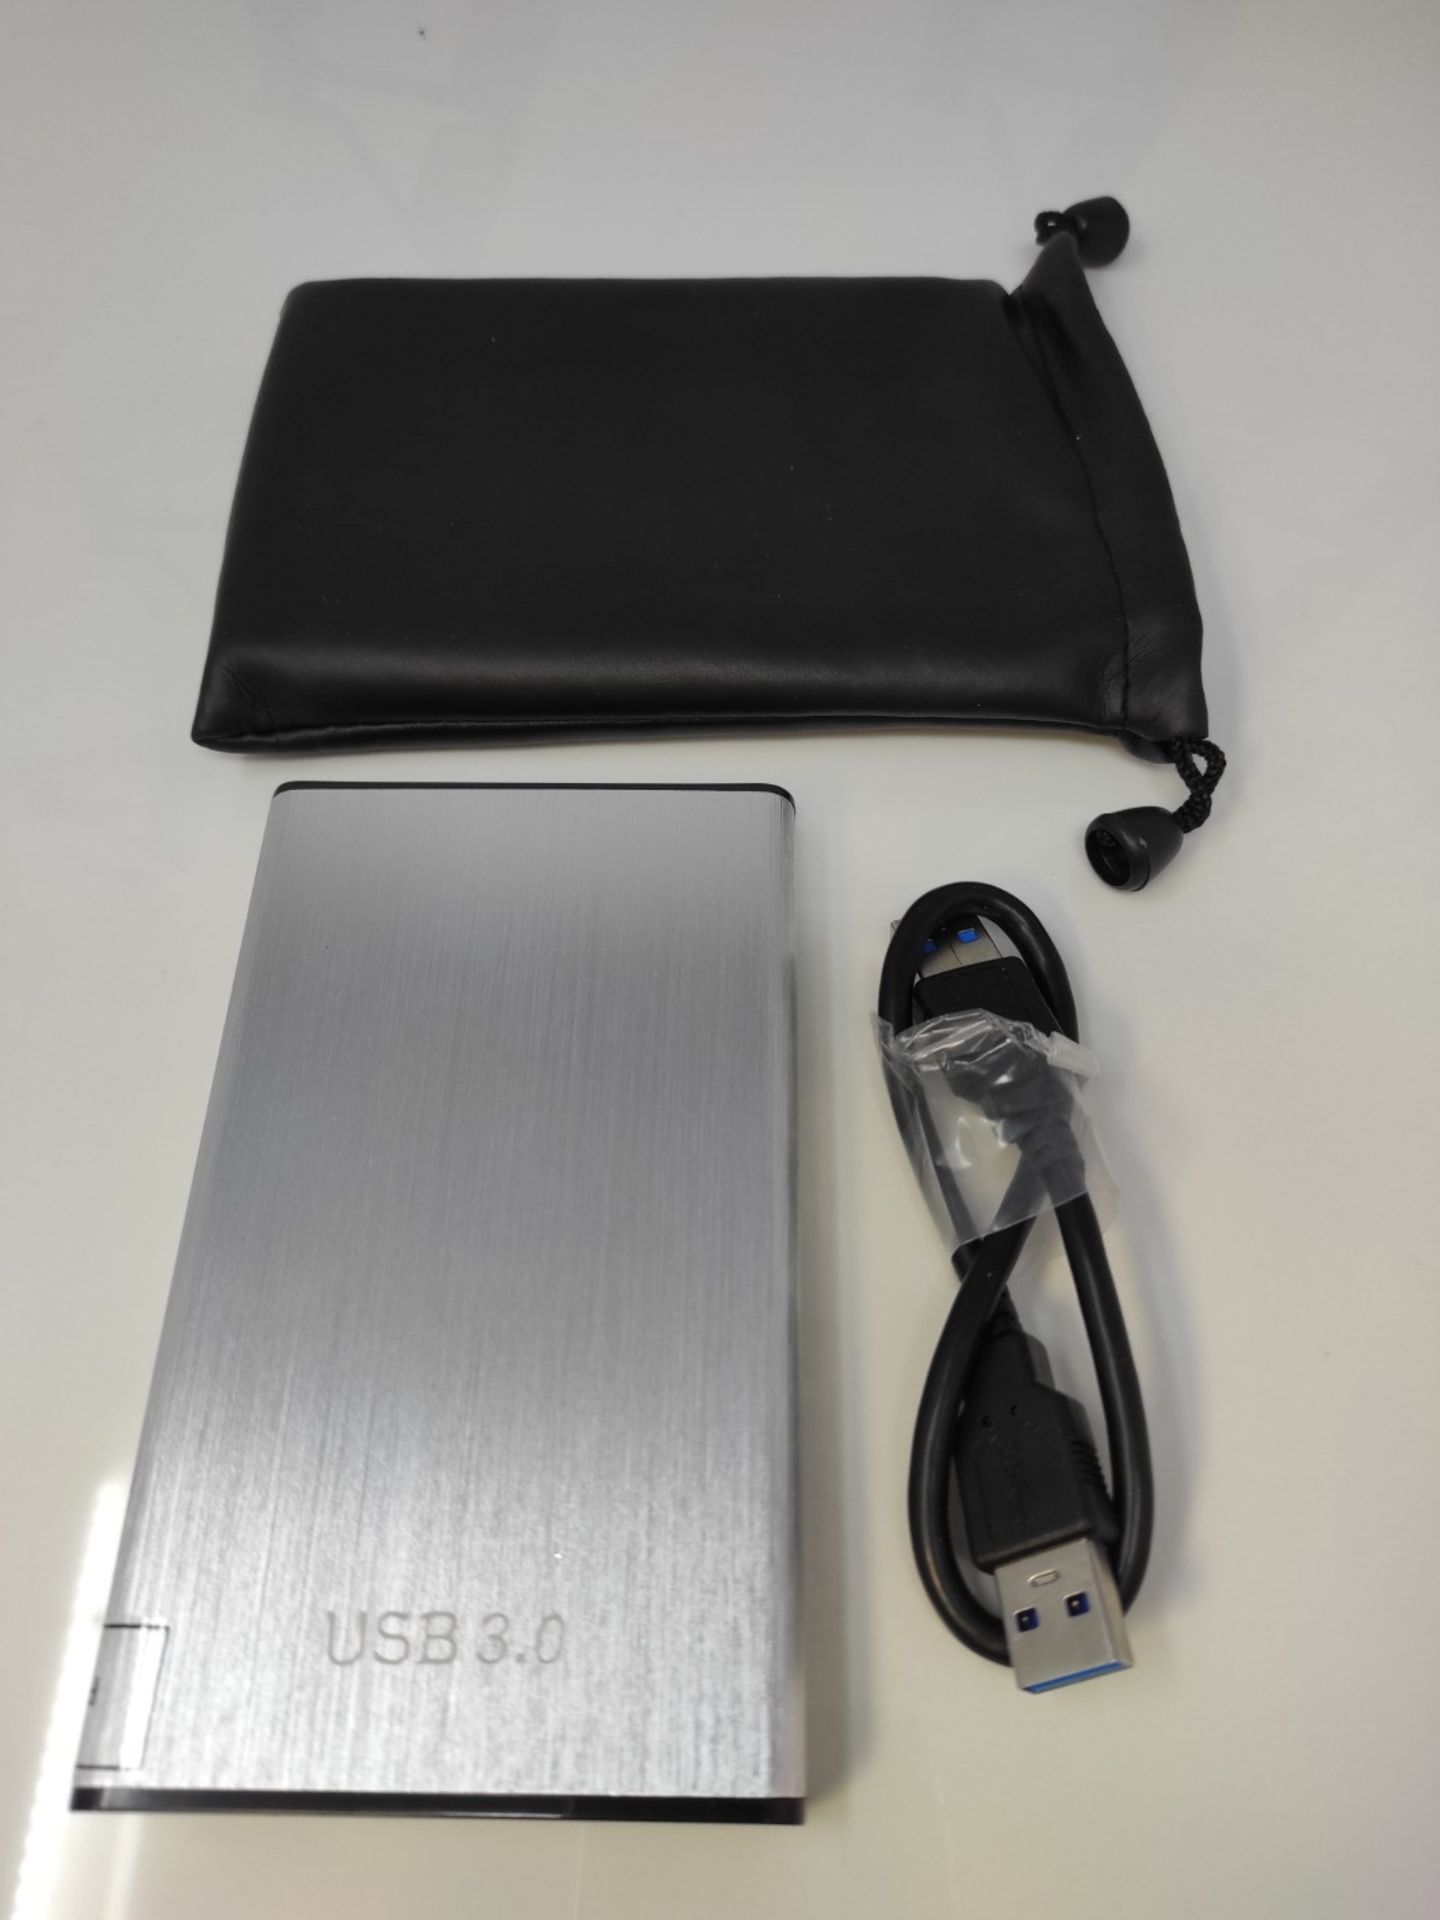 YD0018 USB 3.0 HDD Portable Laptop Mobile Hard Drive, 2.5 Inch Silver Color Universal - Image 4 of 4